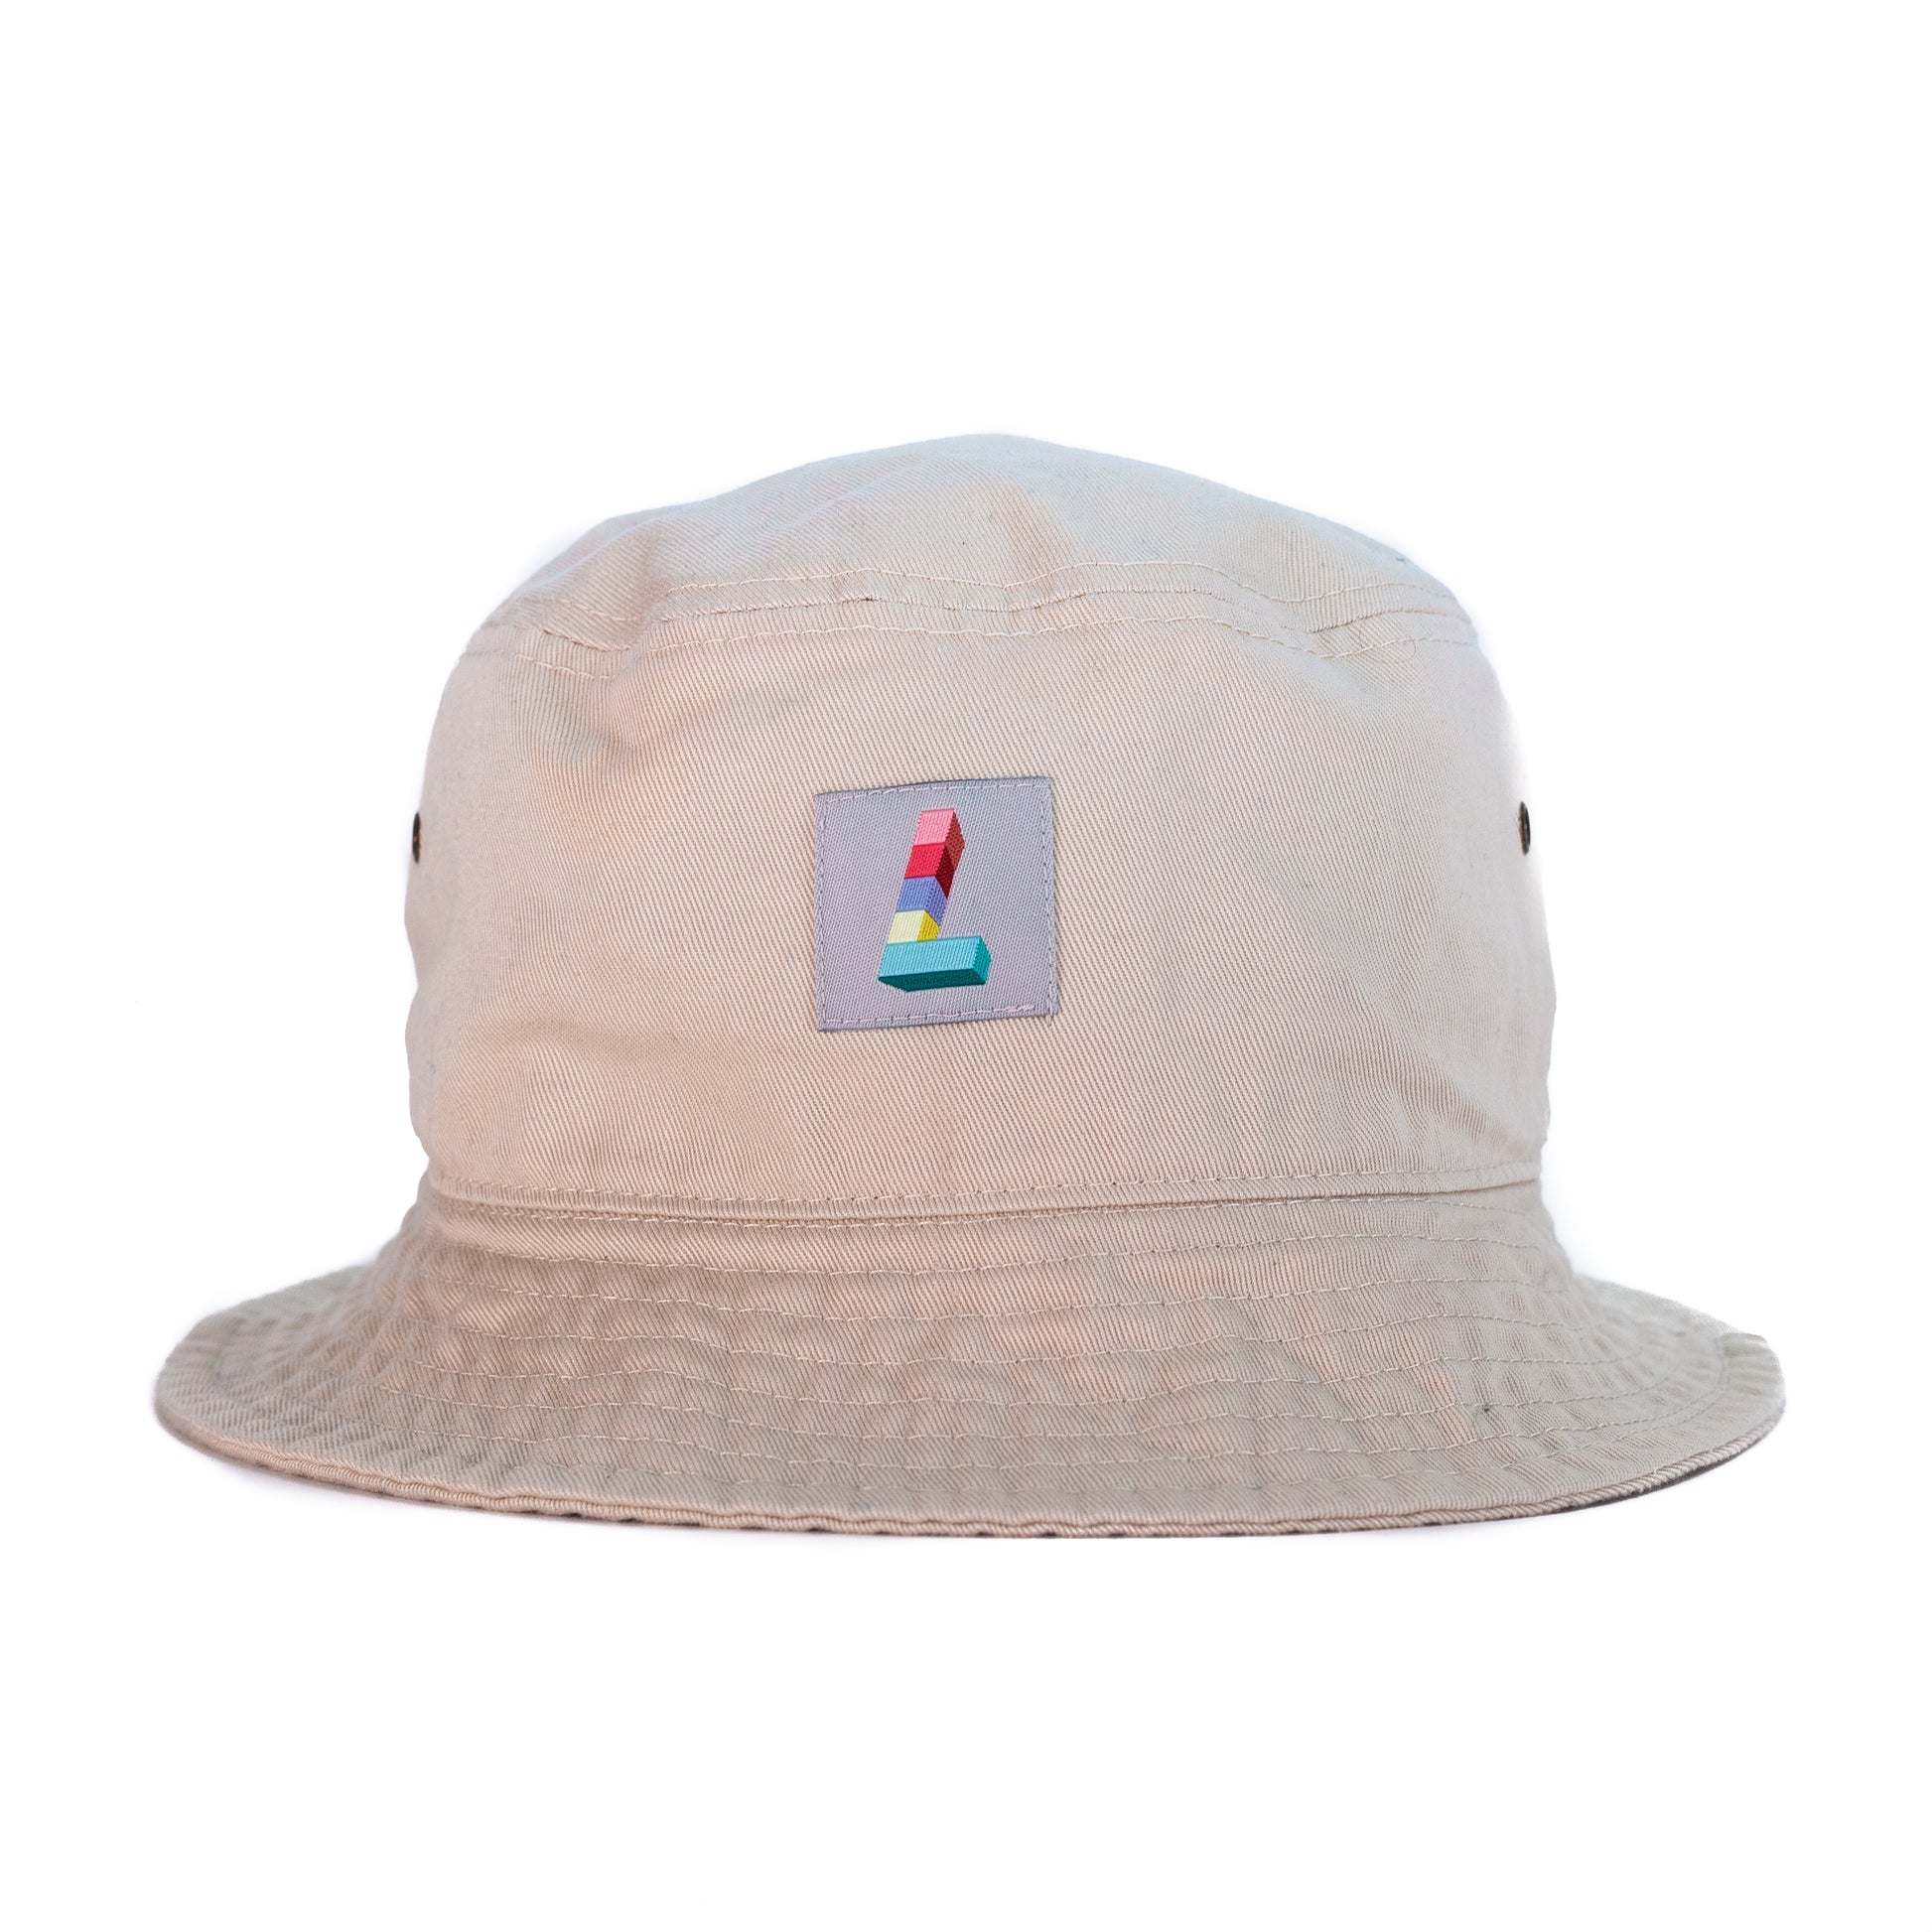 Work Patch Bucket, Tan - Layr Official